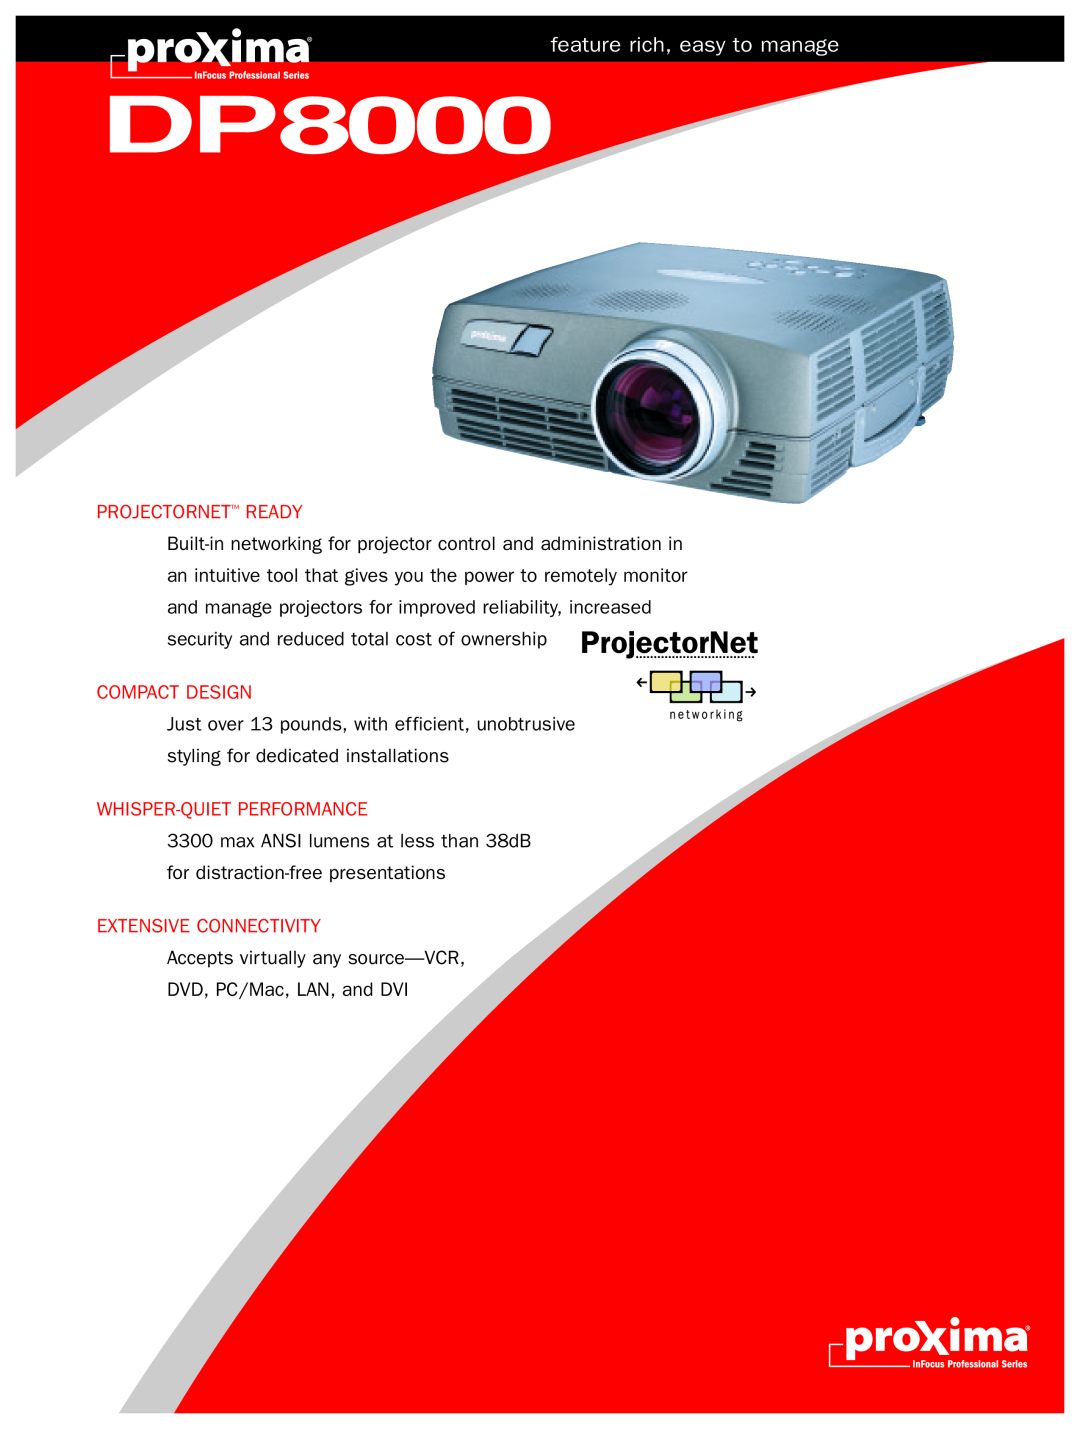 Proxima ASA dp800 manual feature rich, easy to manage, Projectornet Ready, Compact Design, Whisper-Quiet Performance 